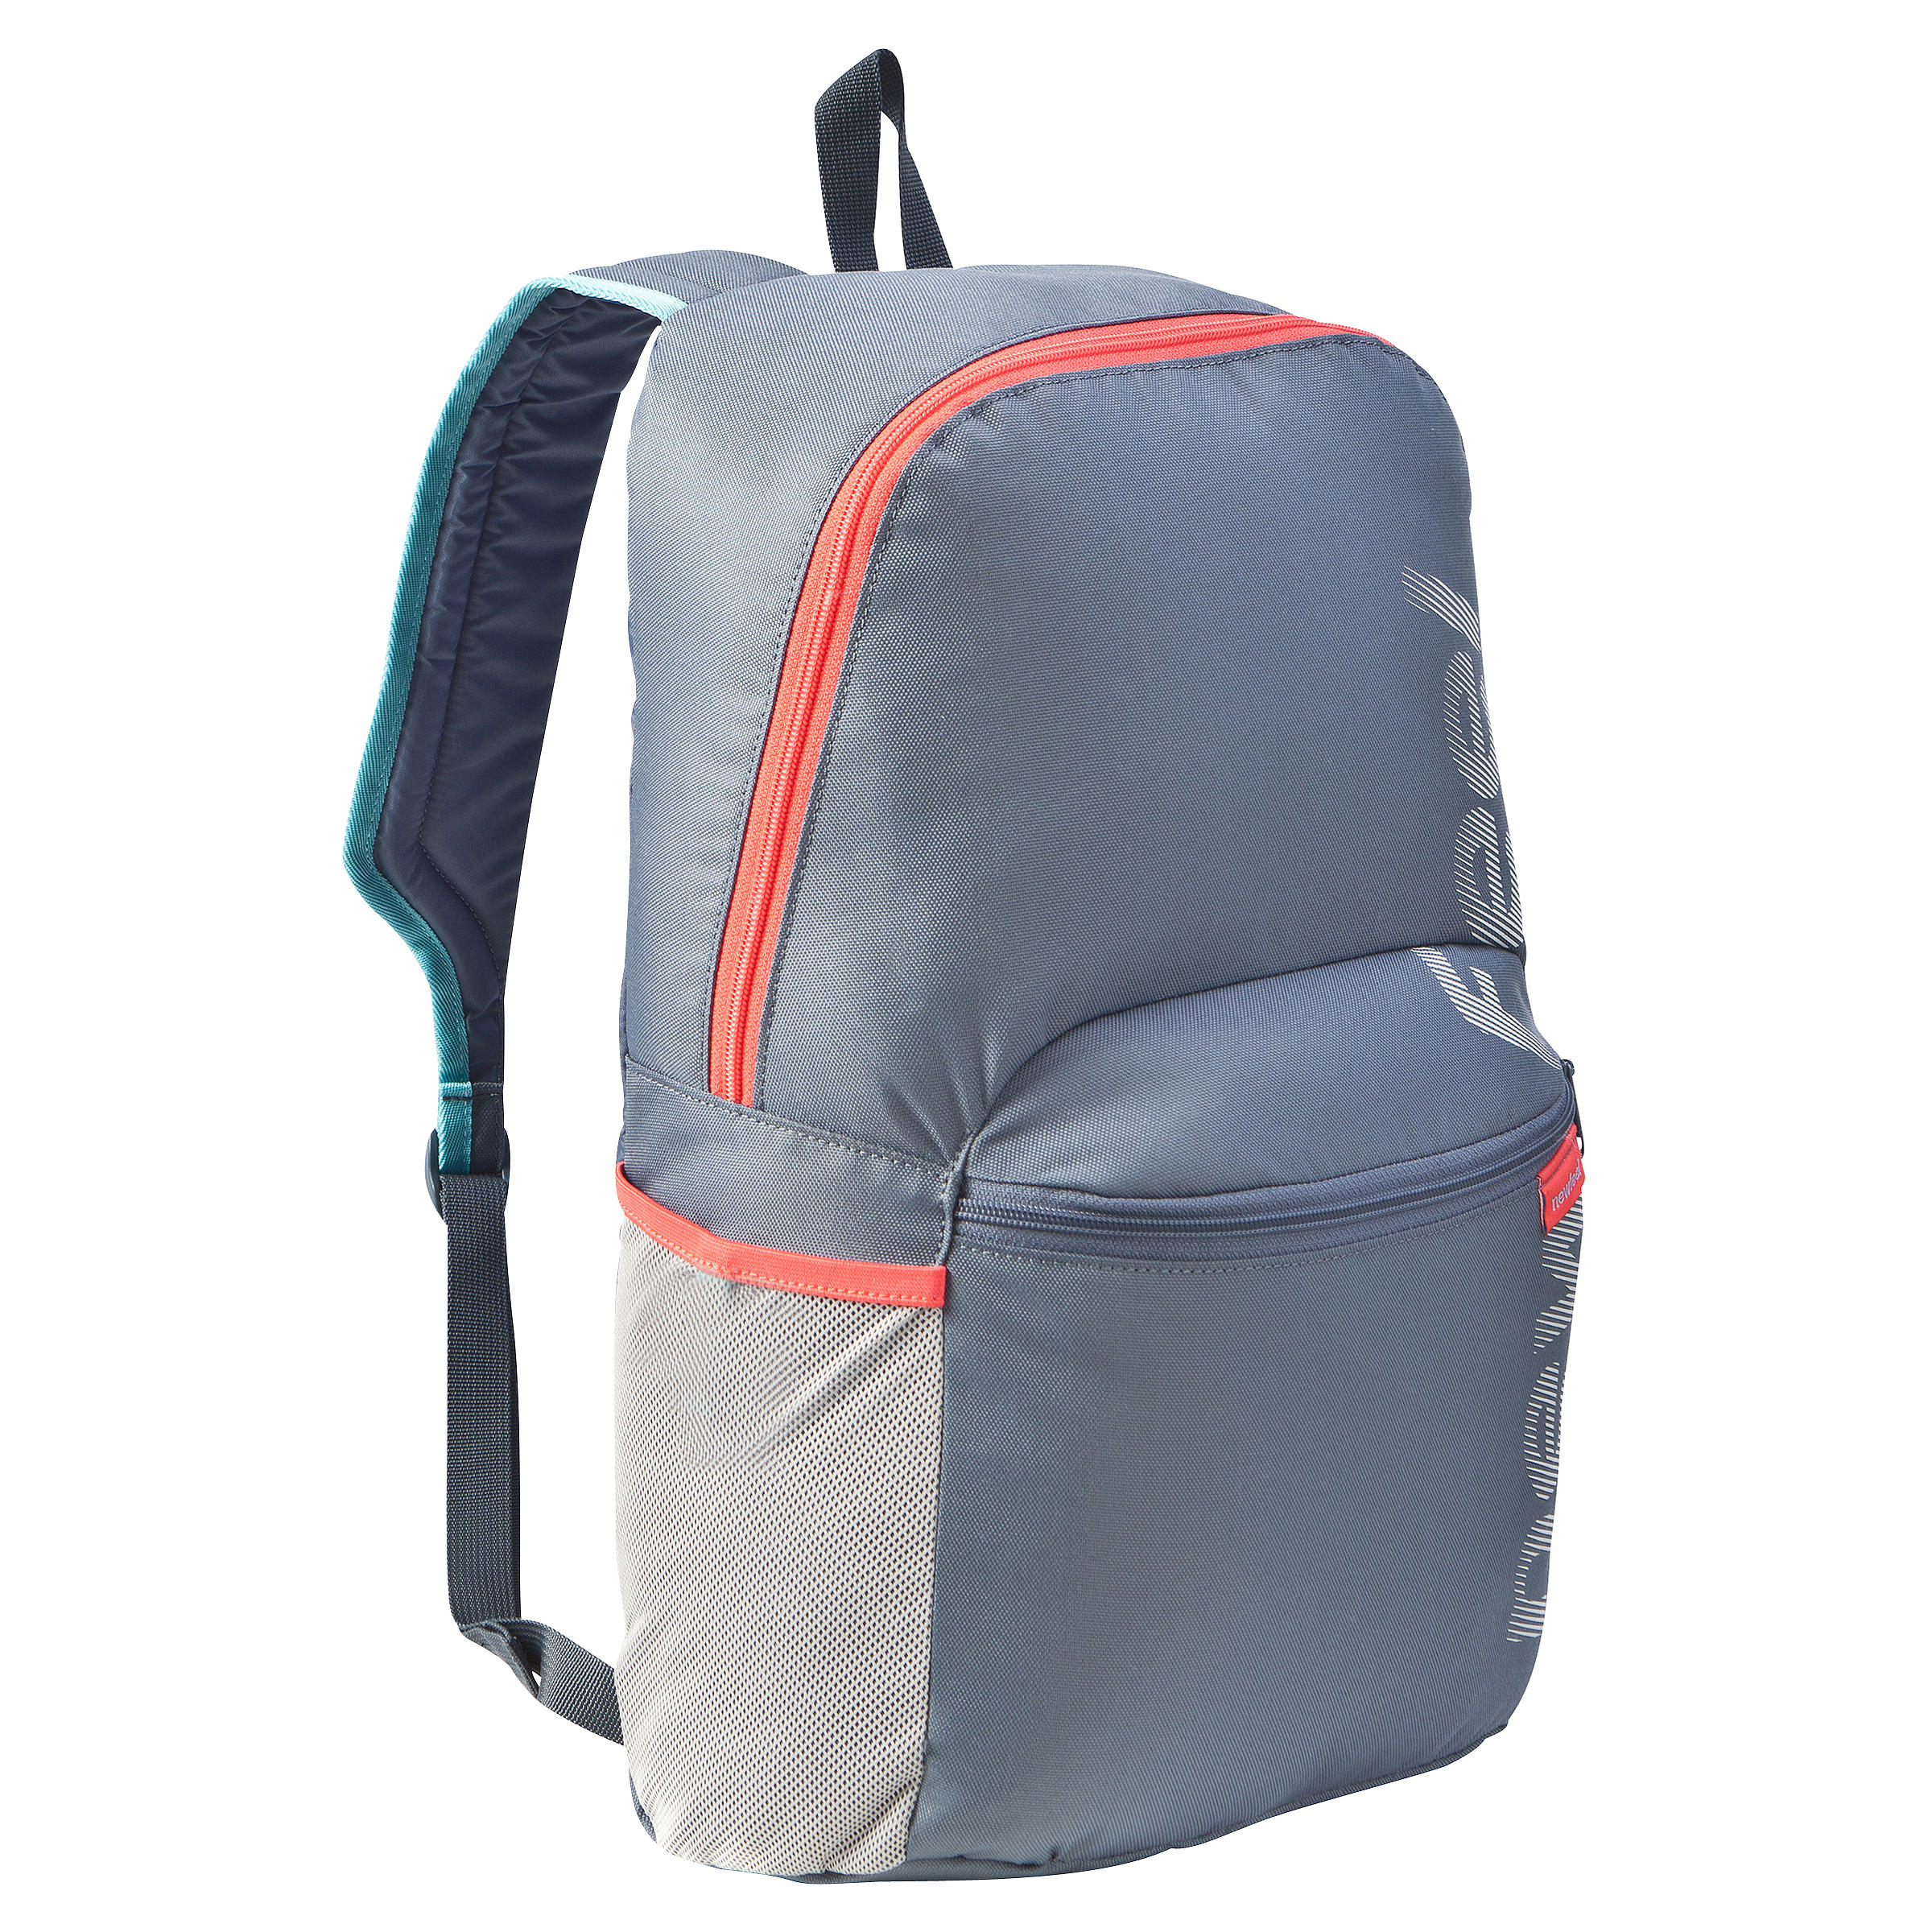 Abeona 140 20l backpack - grey/pink 1/10